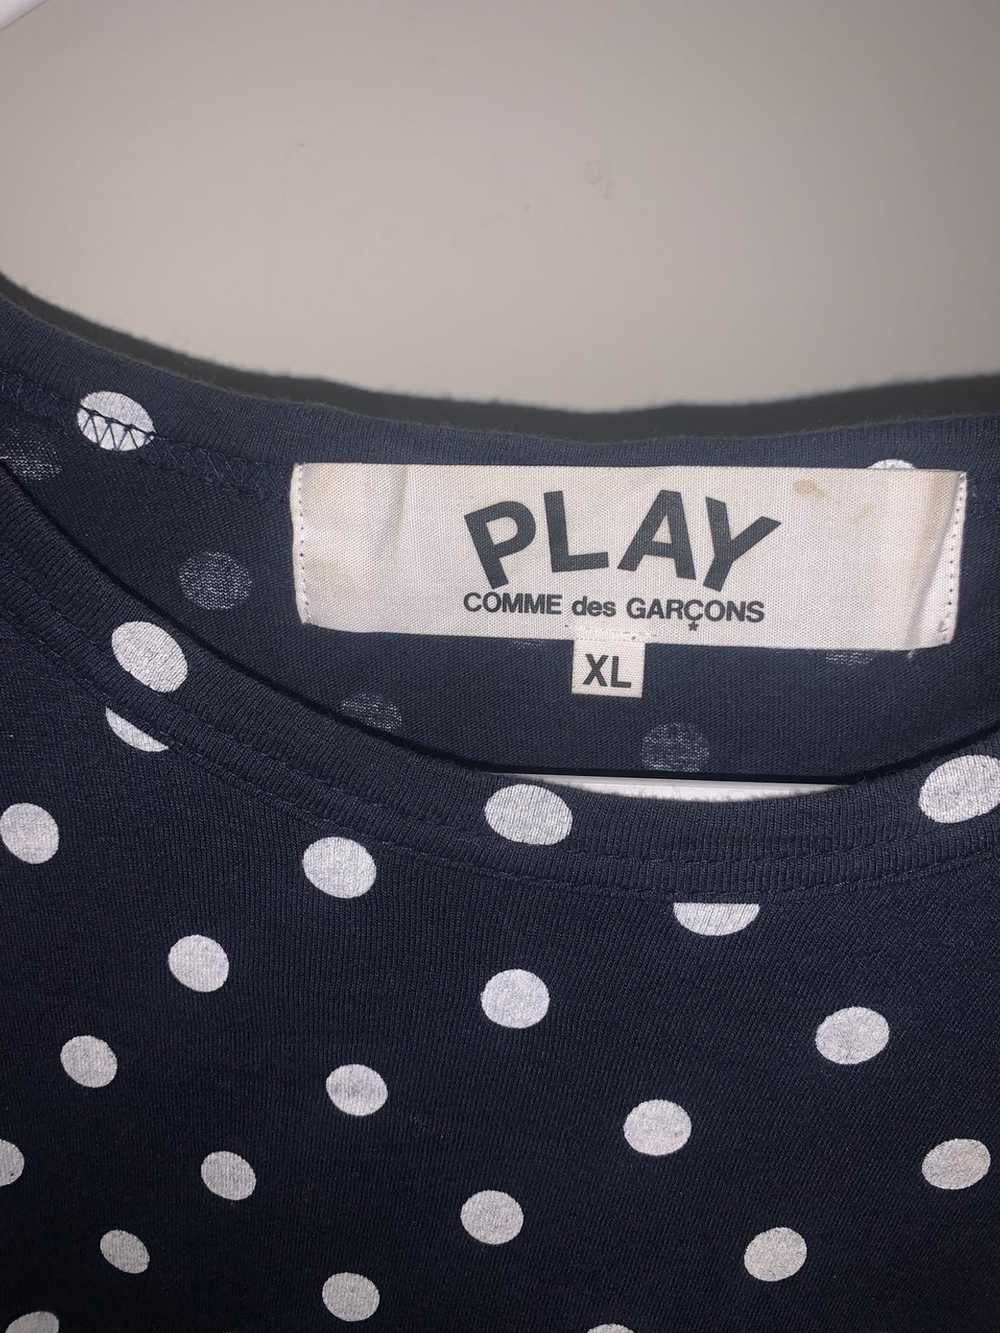 Comme des Garcons Play L/S Blue Polka Dot Tee - image 2